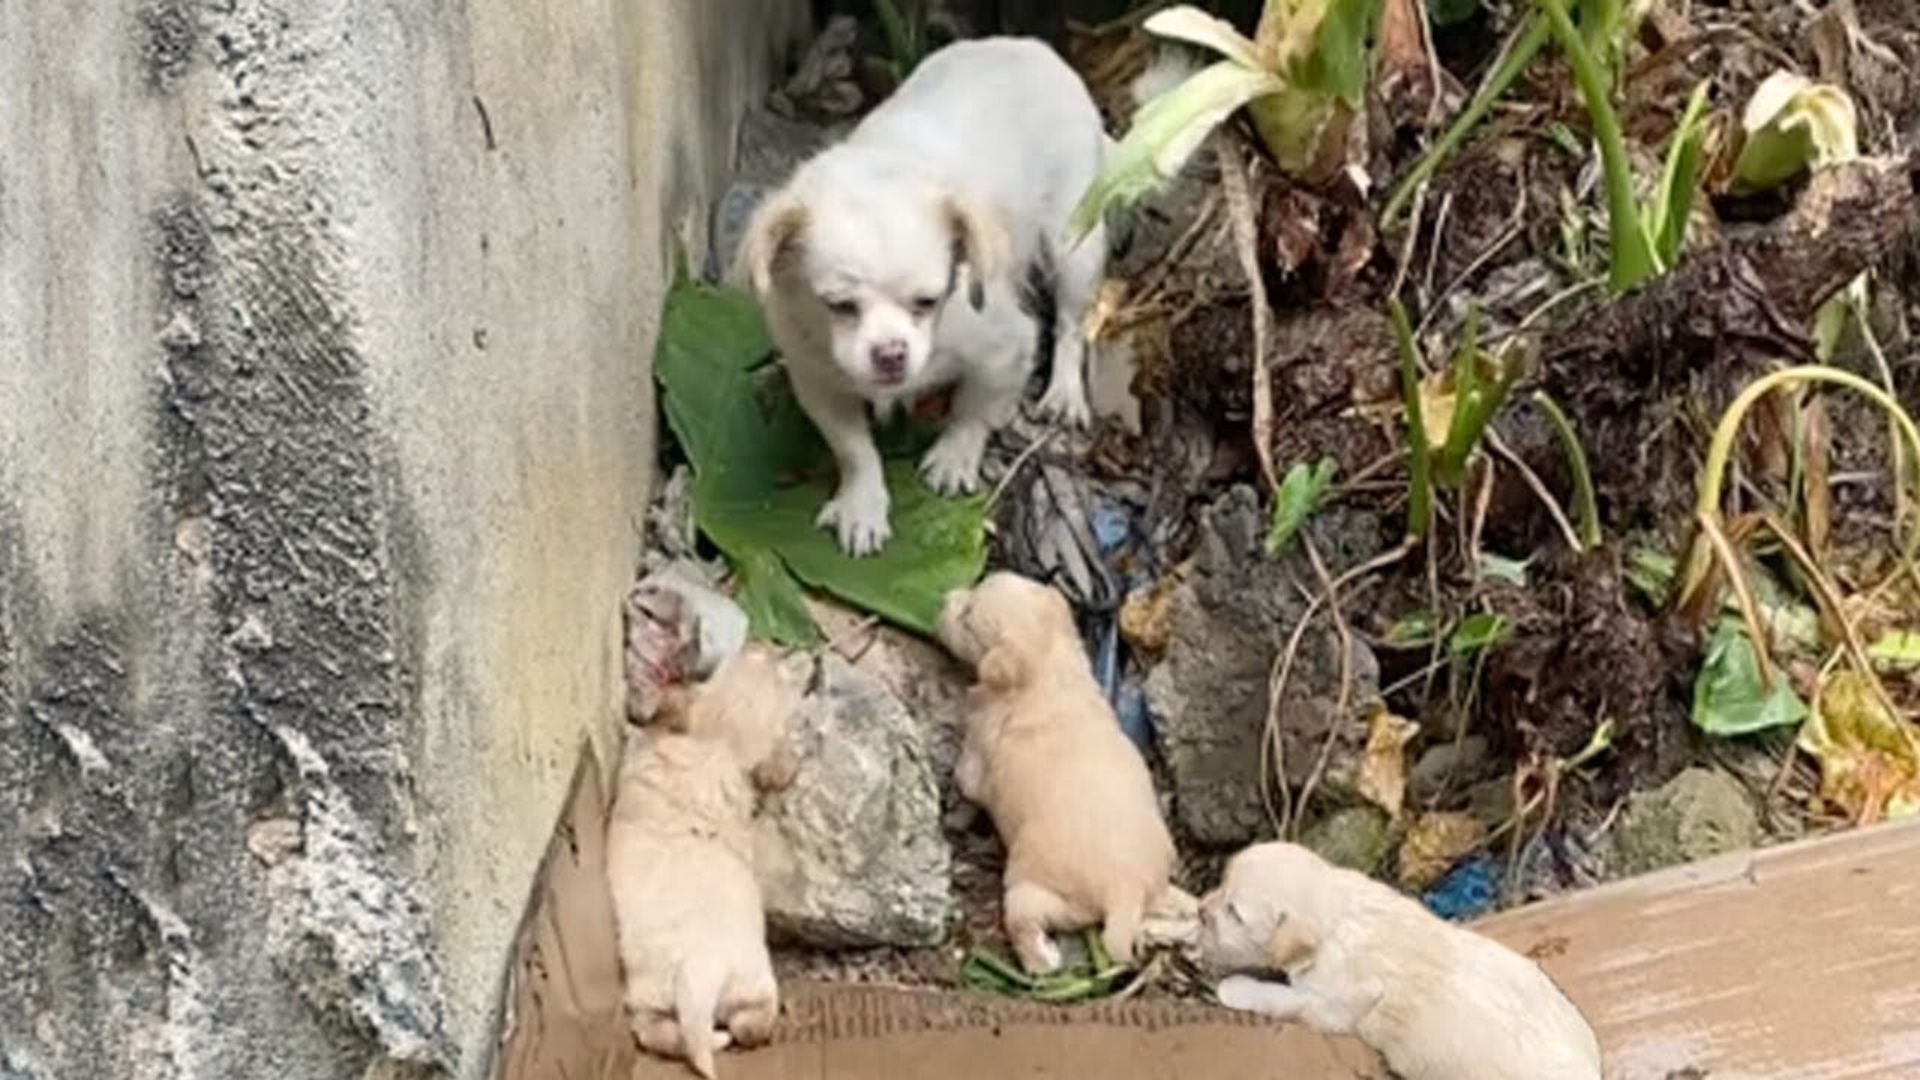 Starving Mama Dog Trying Her Best To Keep Her Babies Warm Finally Finds Hope When A Rescuer Comes To Help